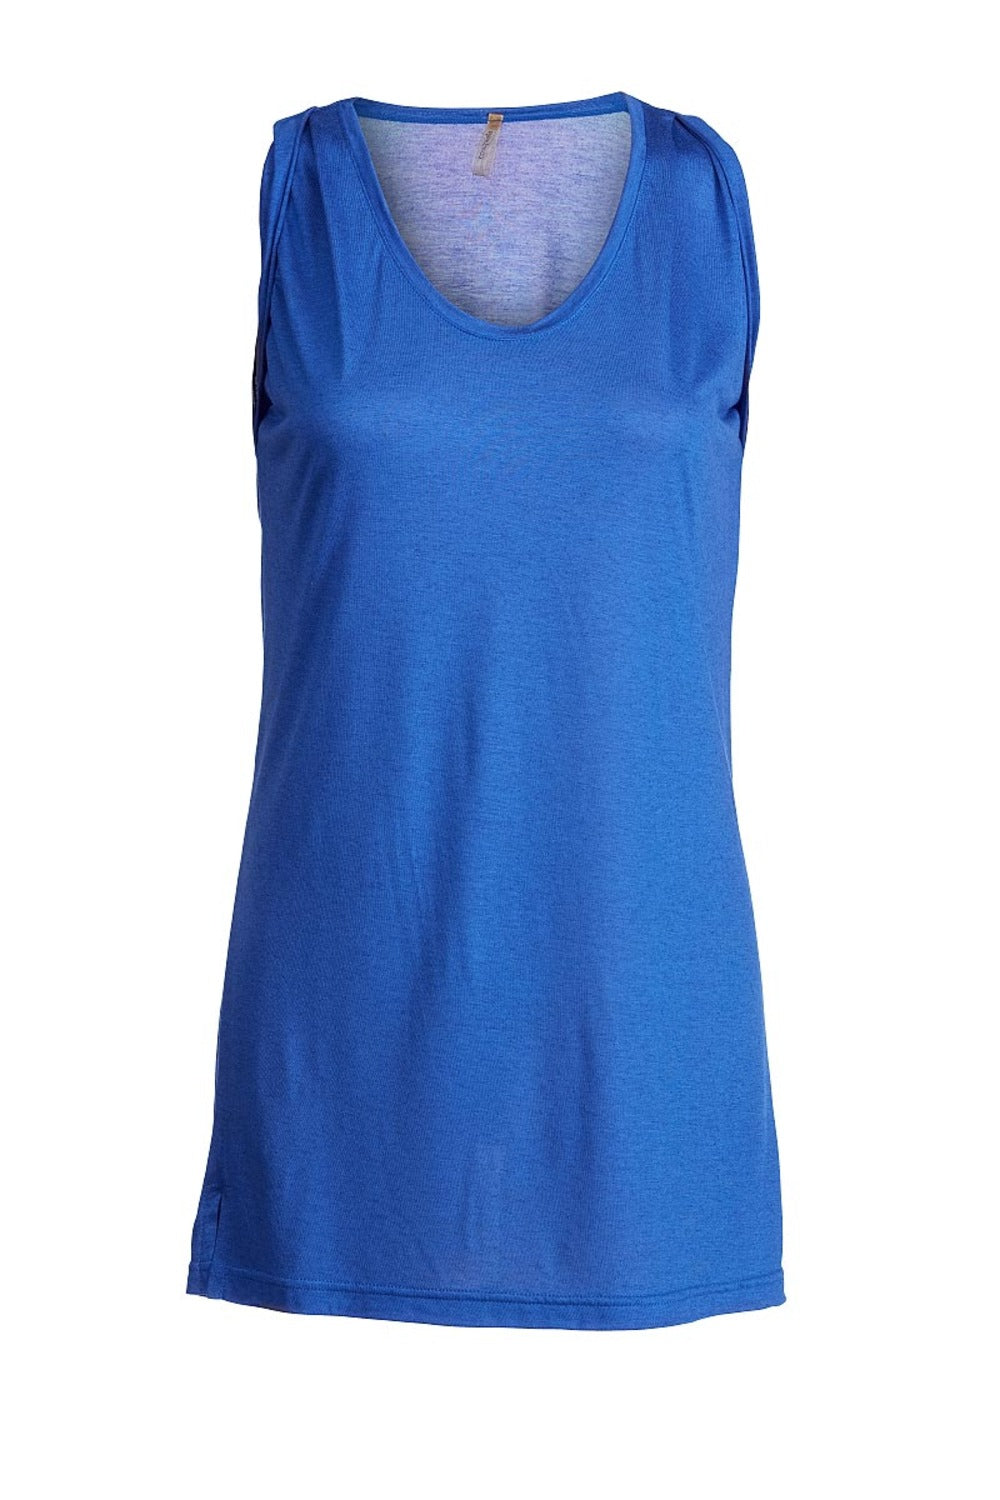 Women’s Blue Sleeveless Tunic With Pleat Detail Extra Small Conquista